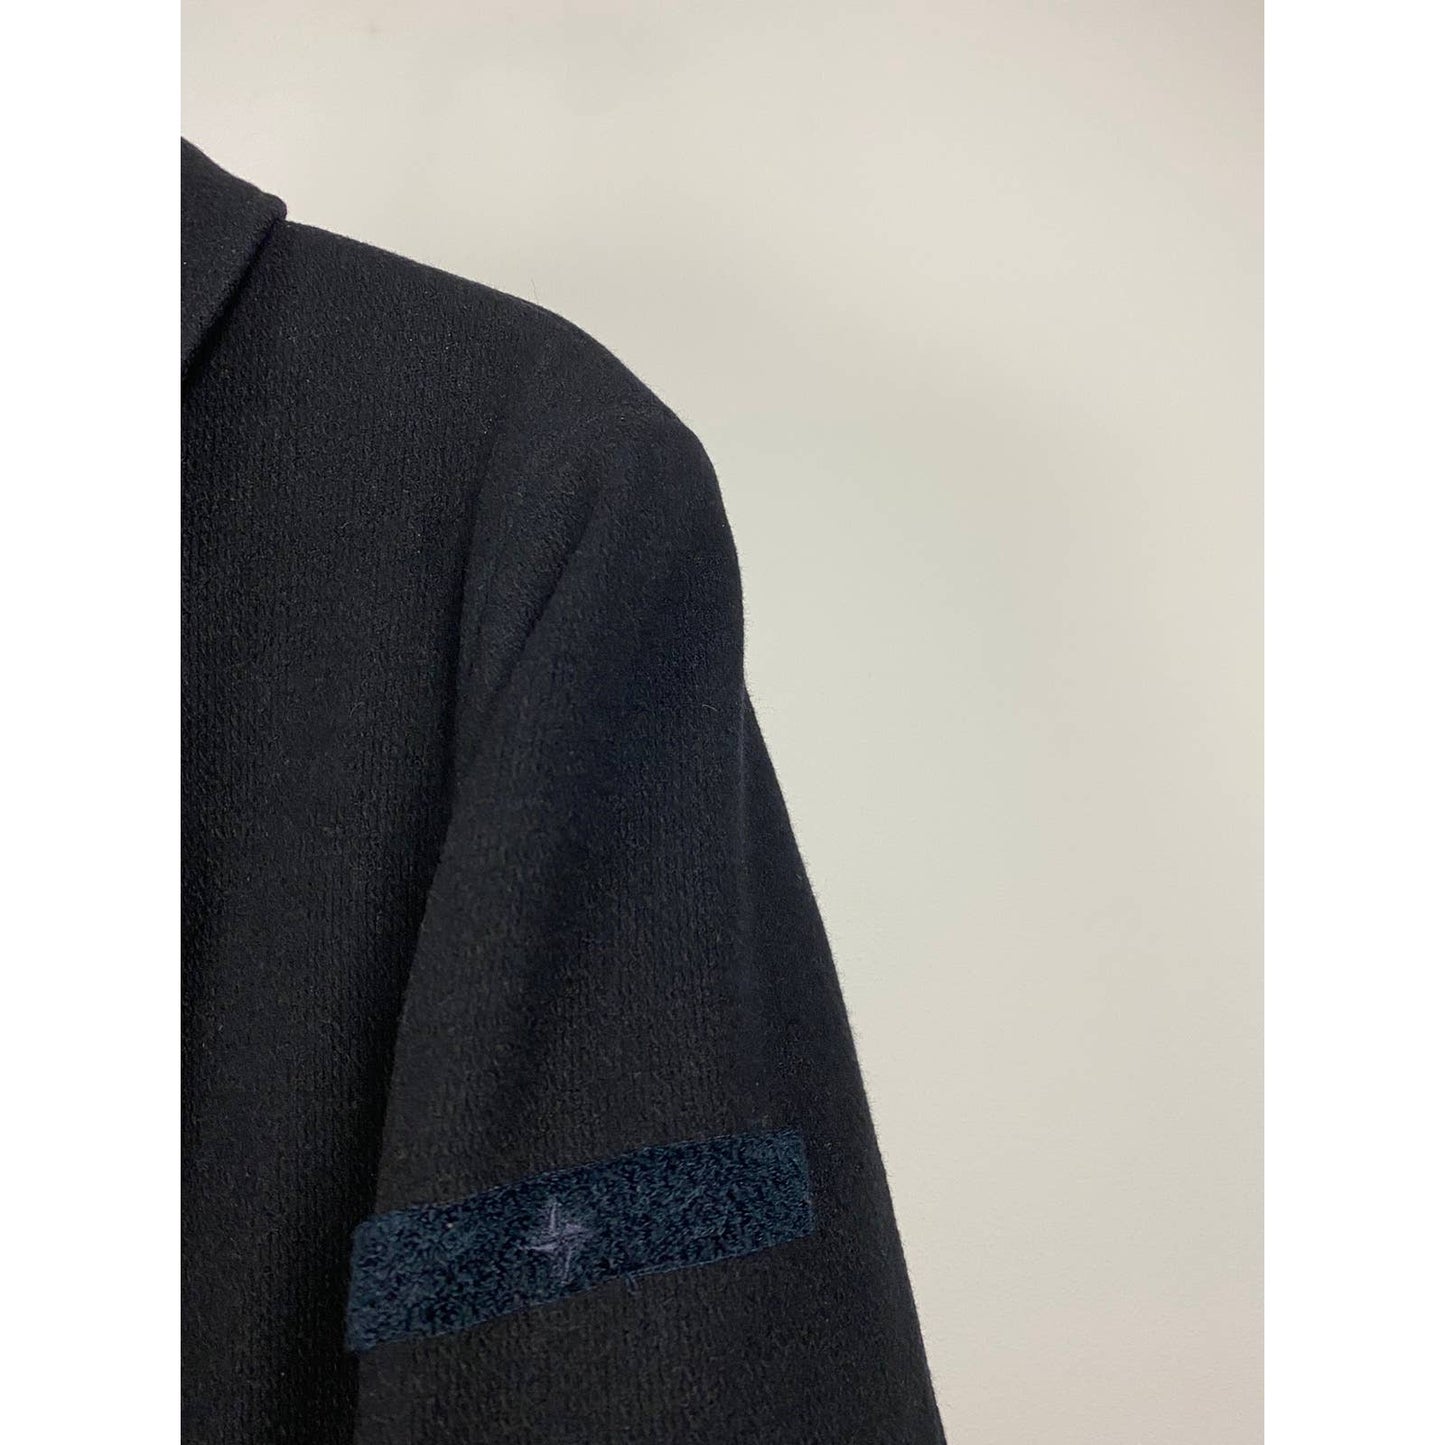 Archive Stone Island Denims woollen coat double breasted